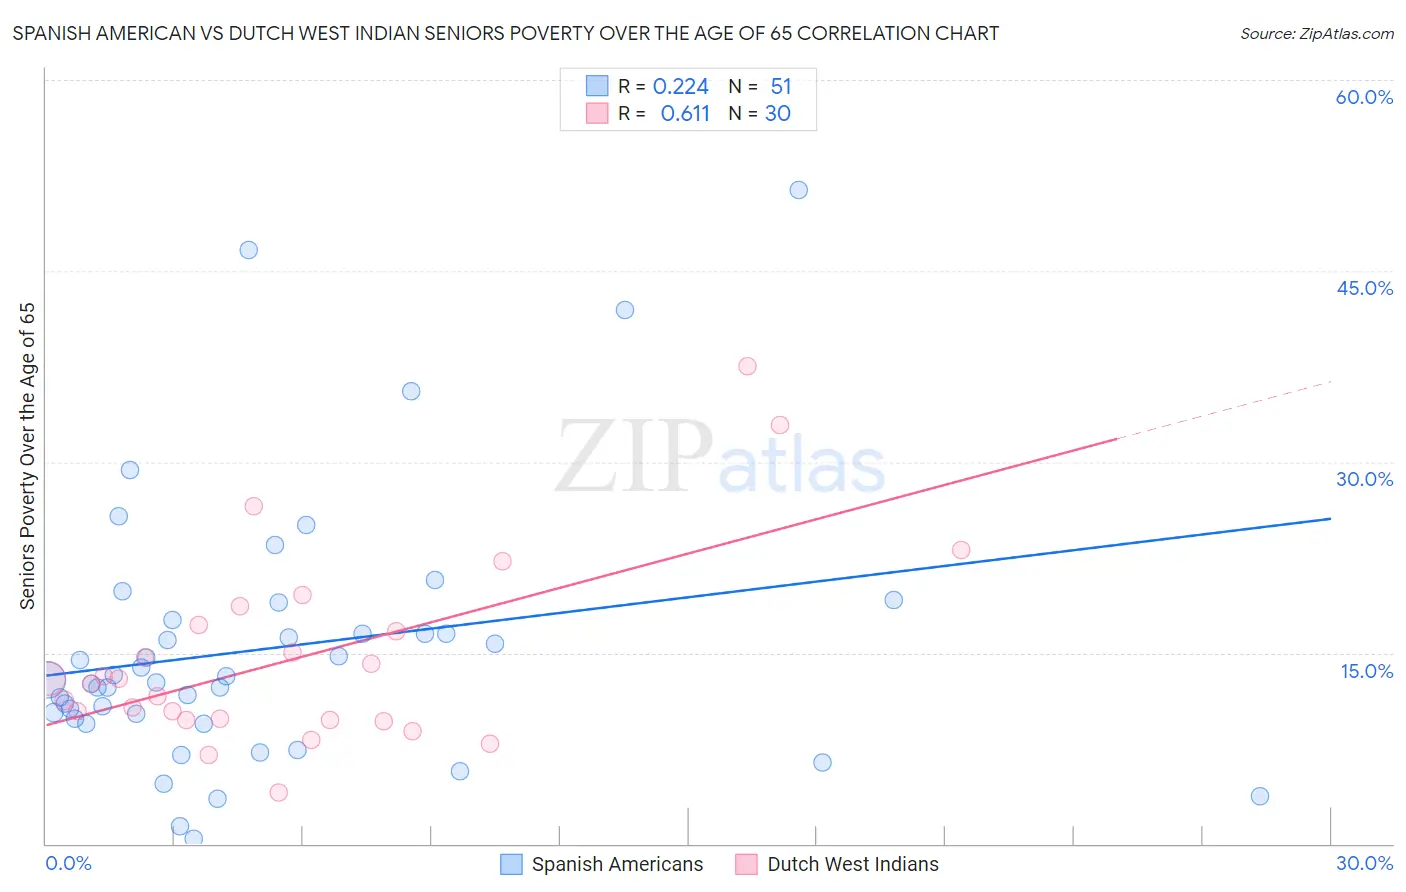 Spanish American vs Dutch West Indian Seniors Poverty Over the Age of 65